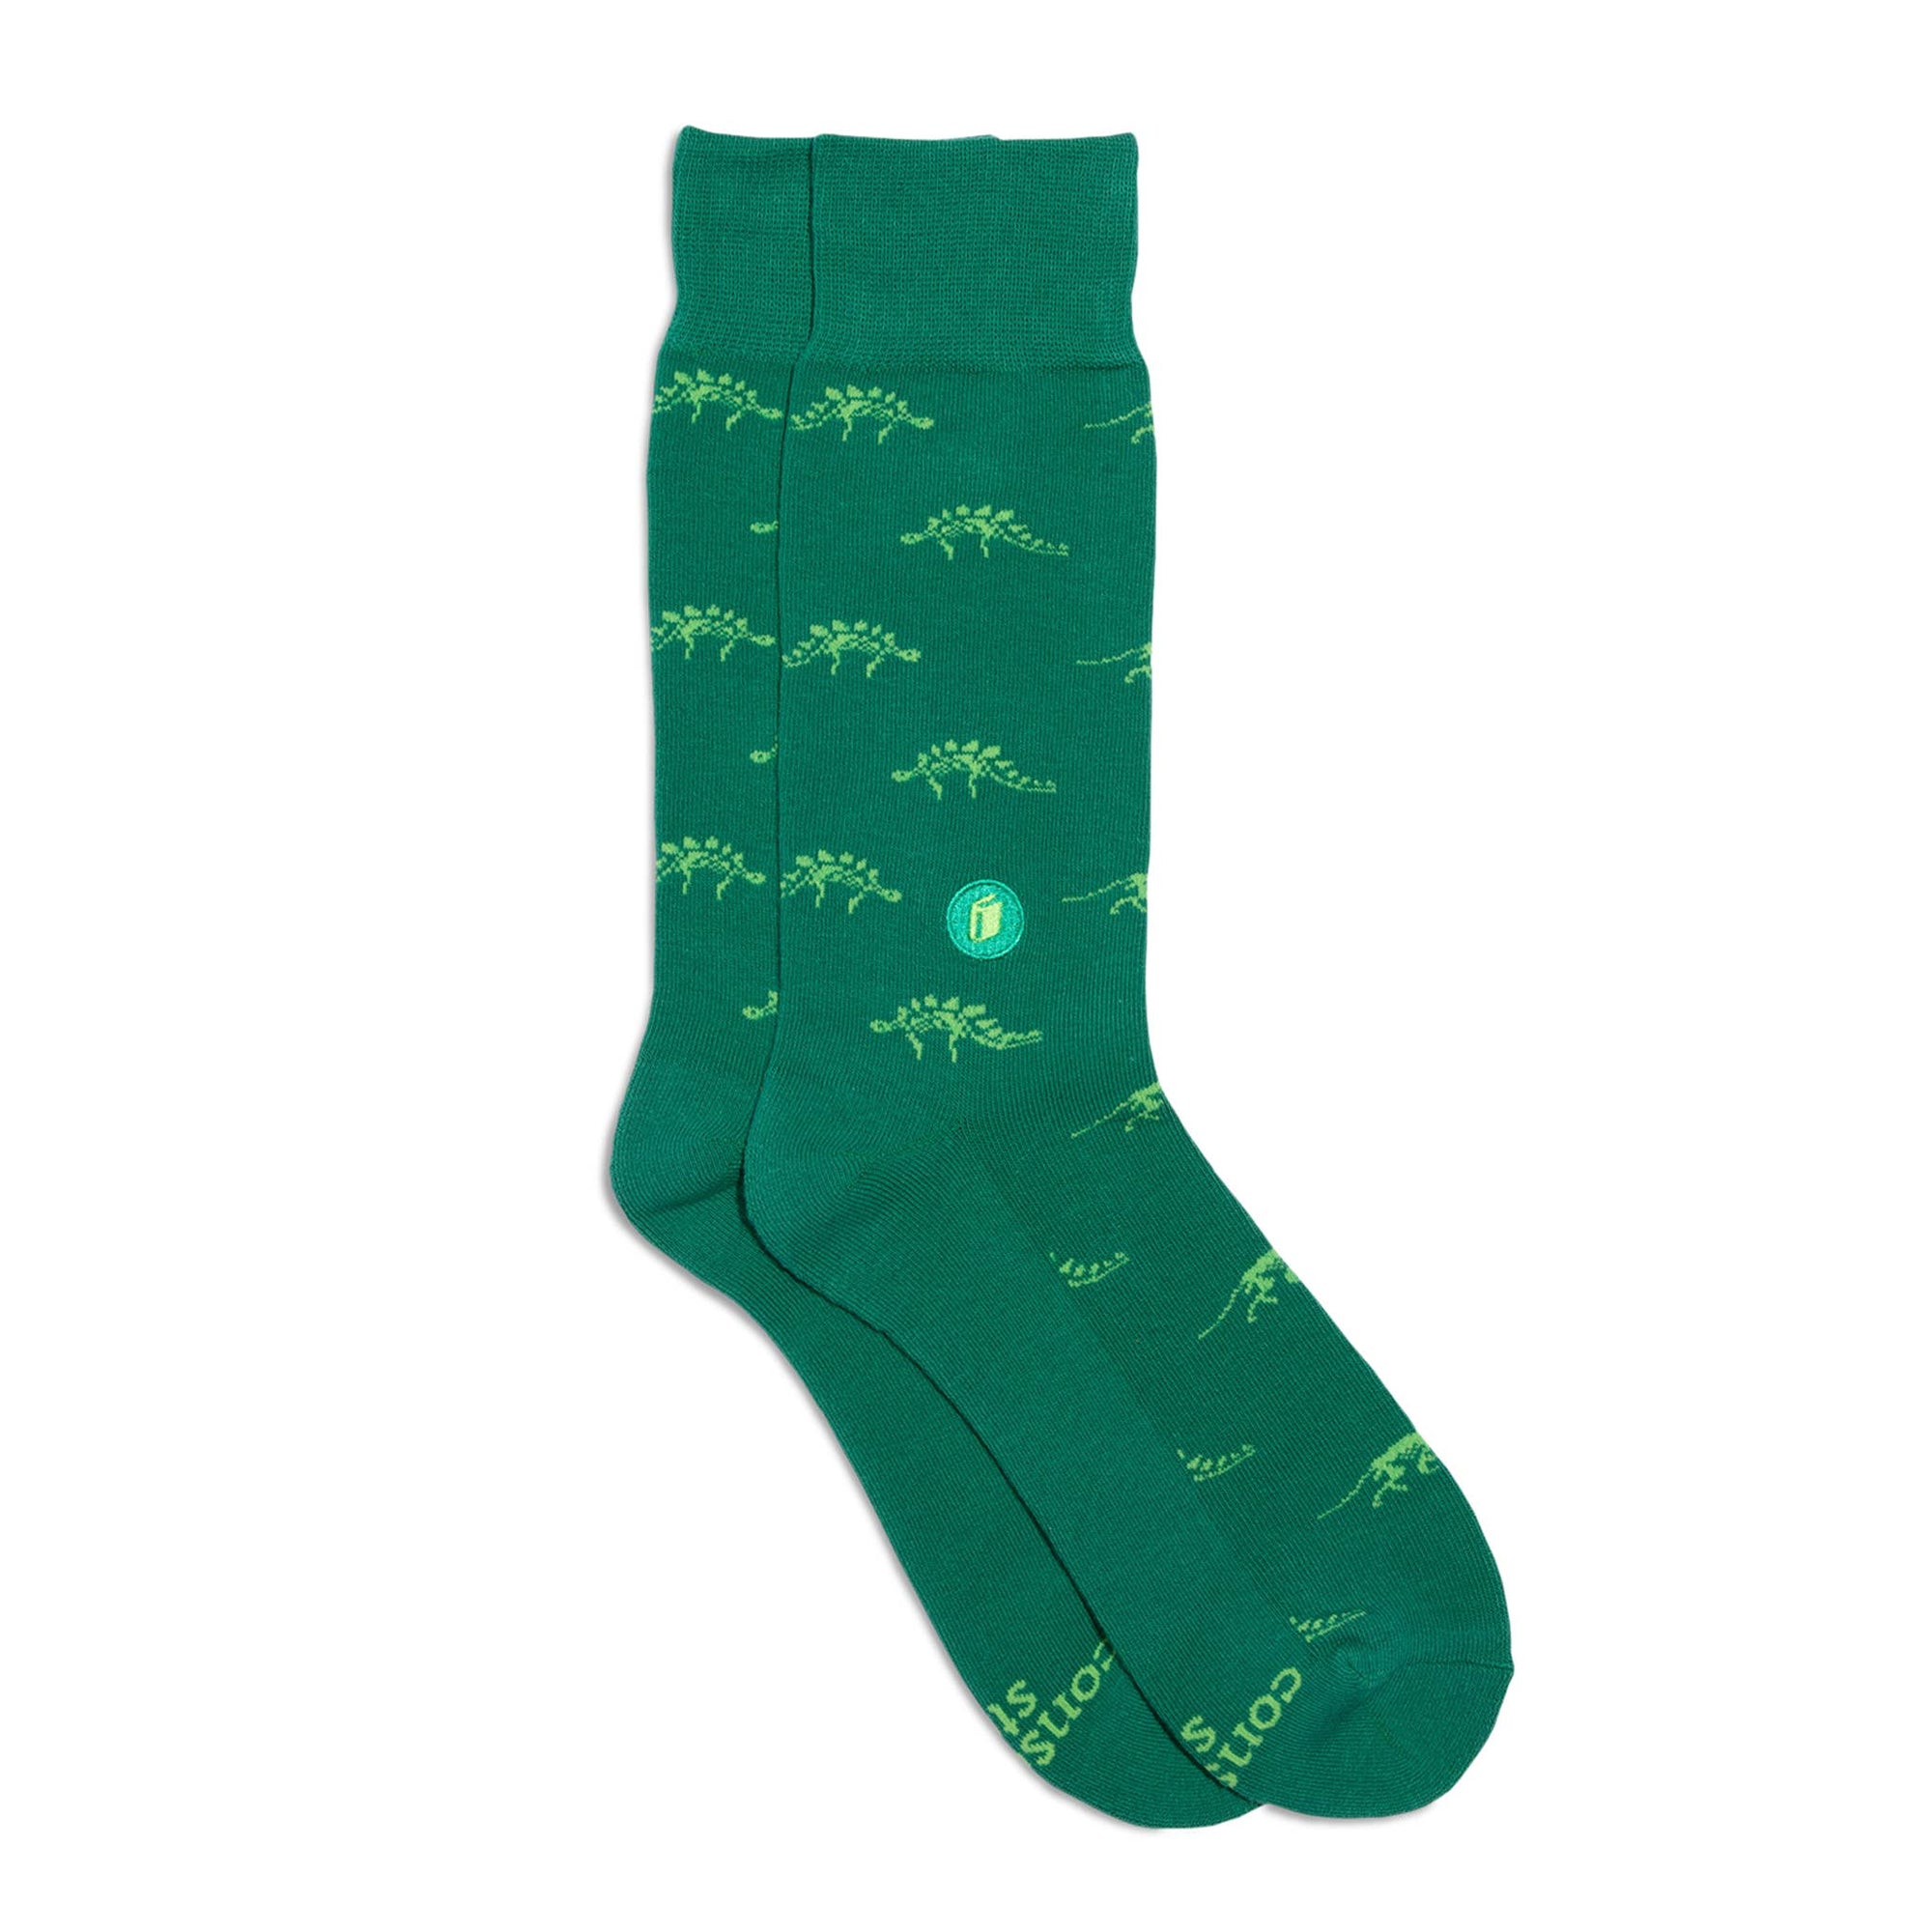 Socks that Give Books (Green Dinosaurs)